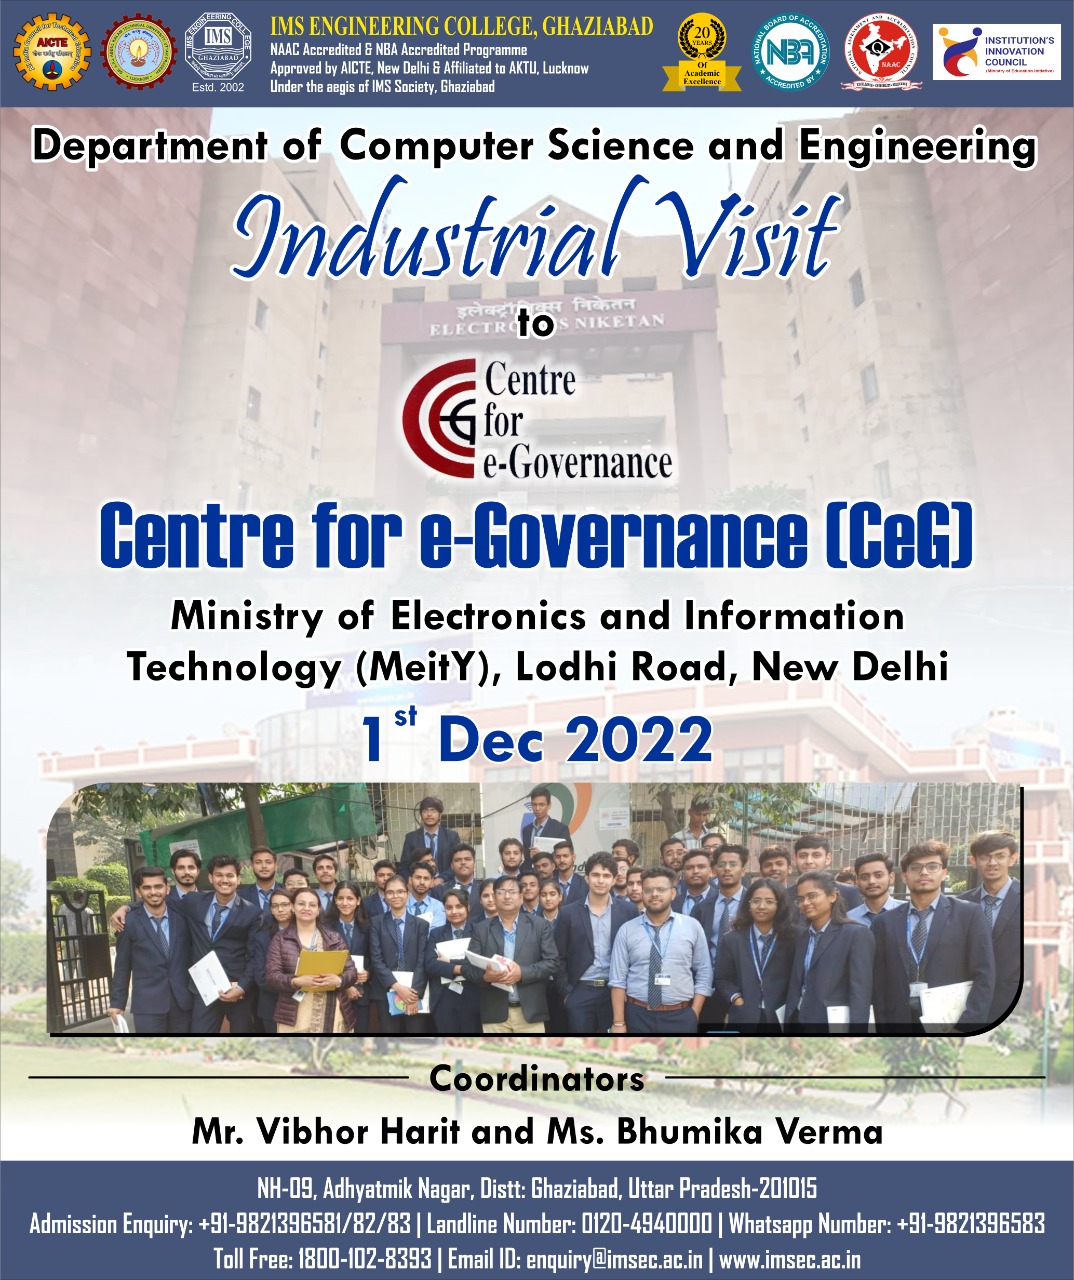  Industrial visit to Ministry of Electronics and Information Technology